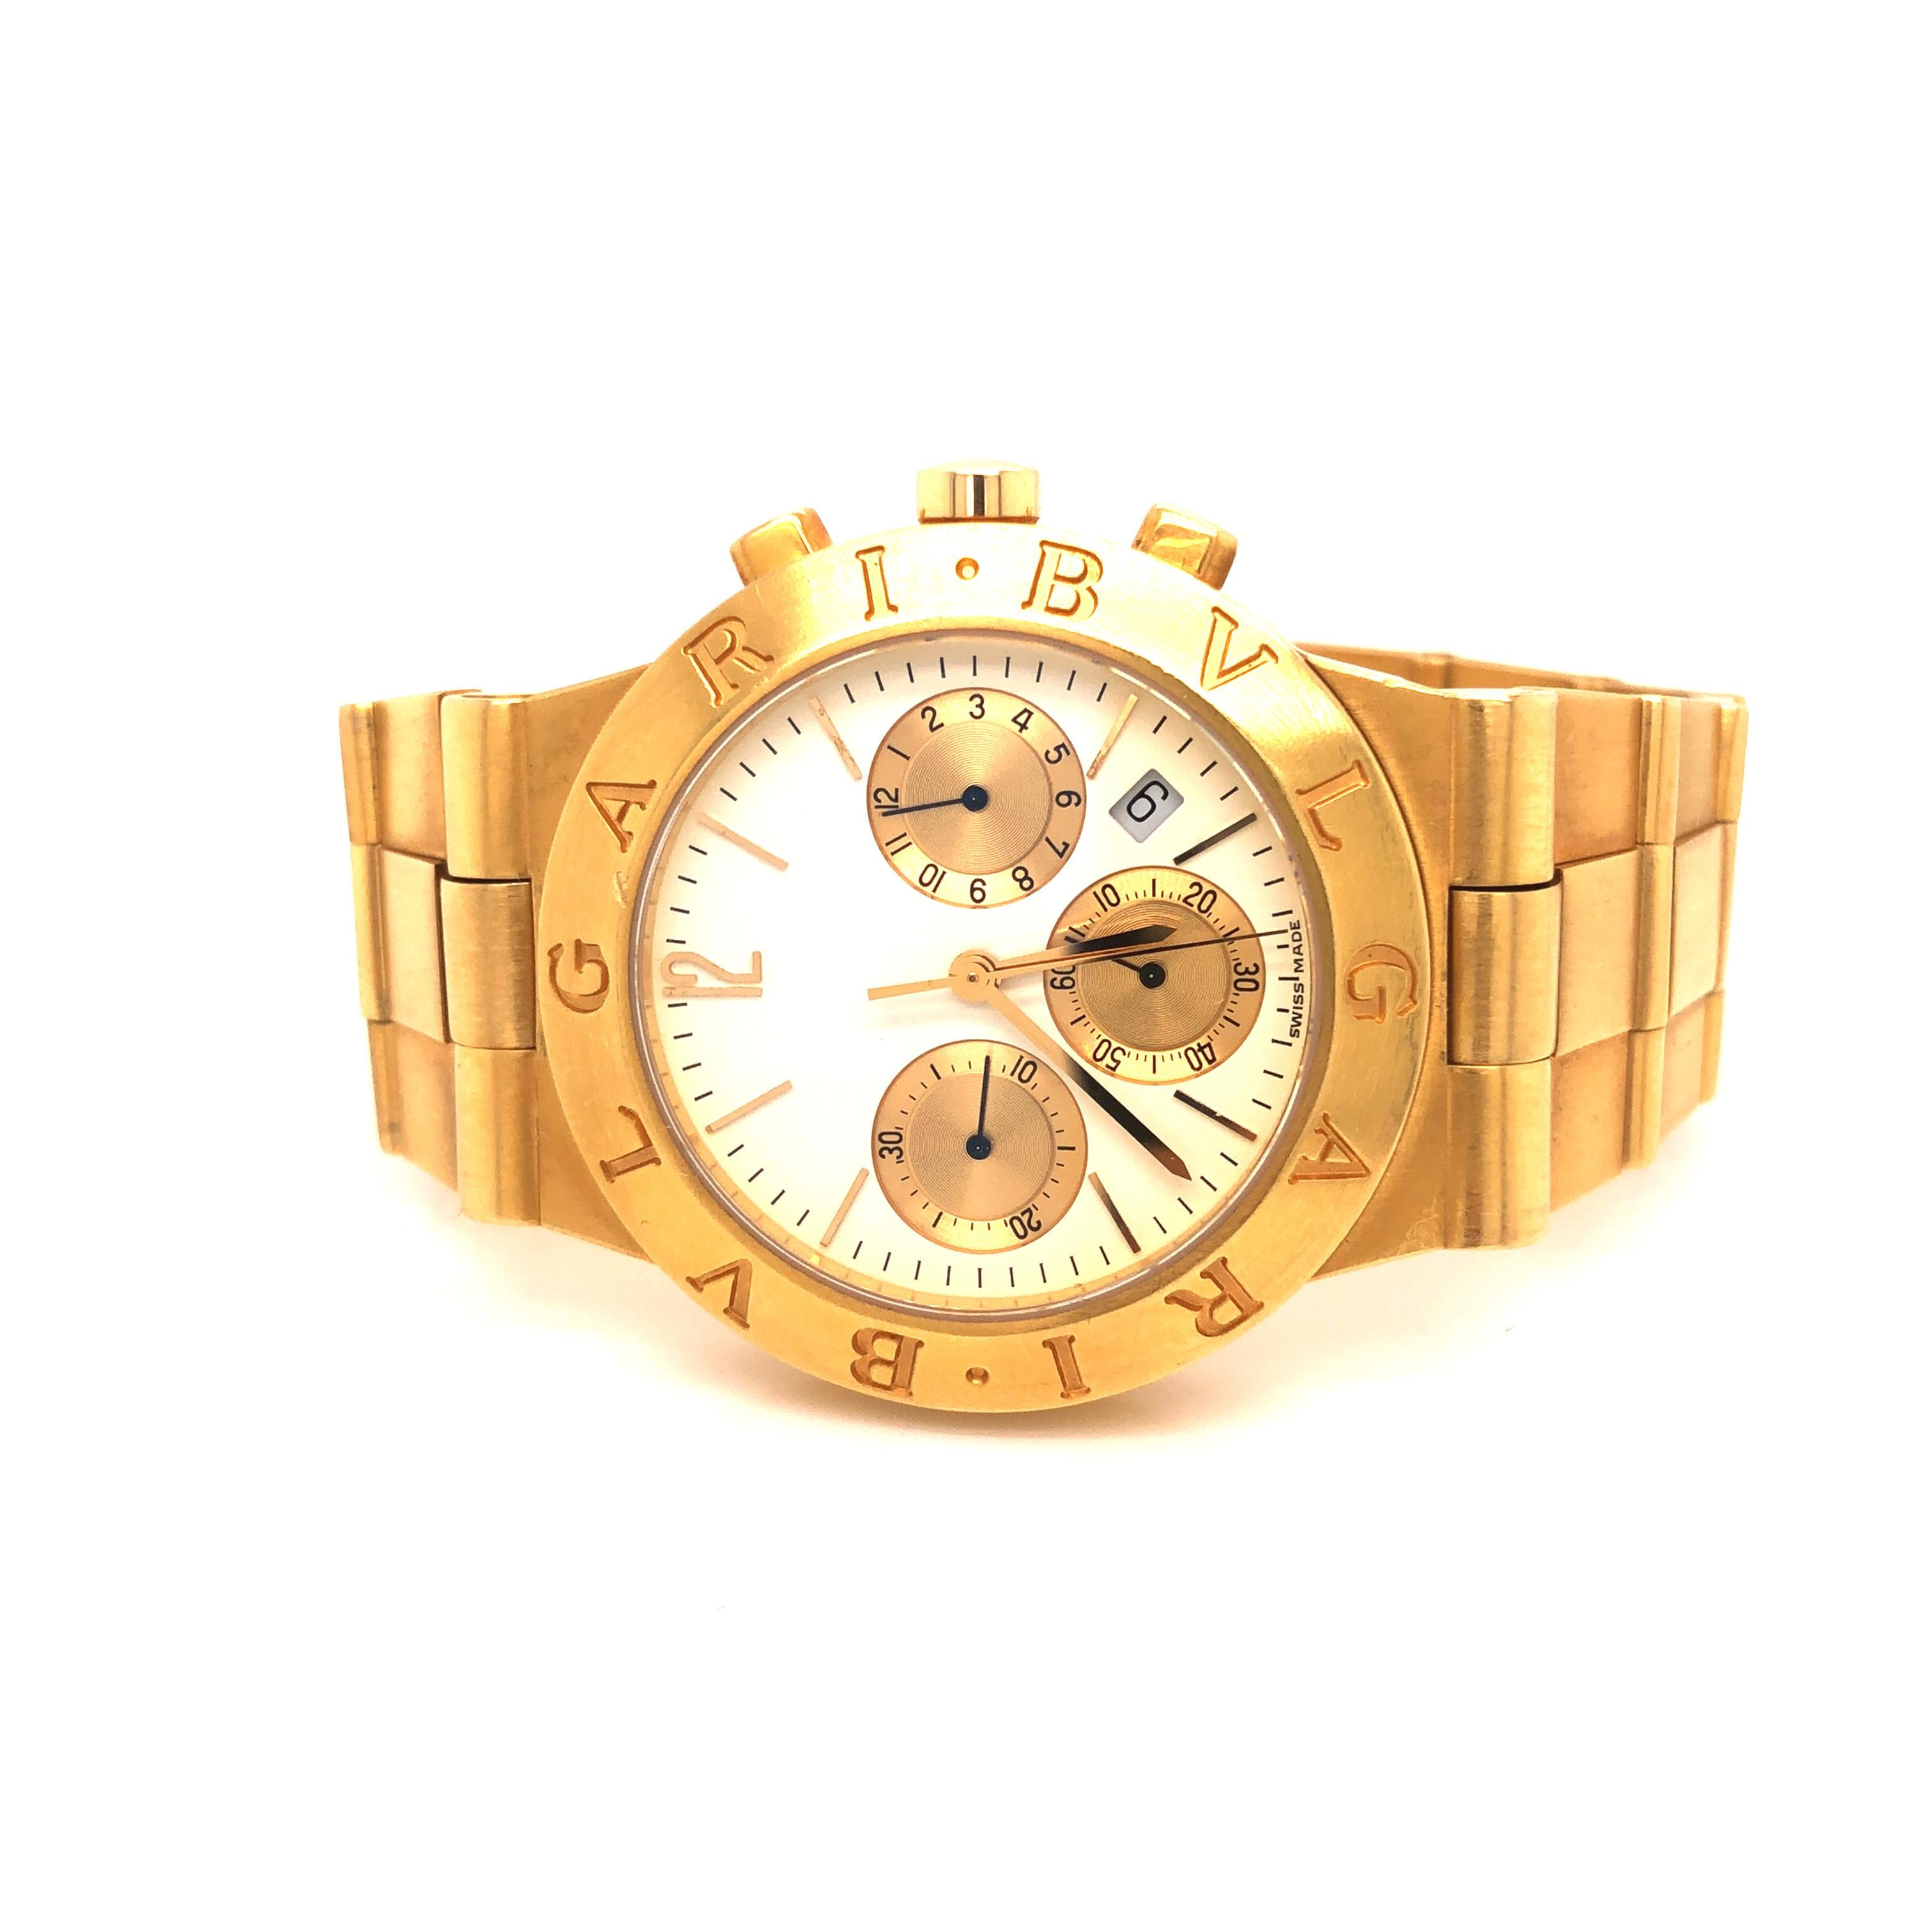 Bvlgari Diagono Scuba 18K Yellow Gold Chronograph Automatic Watch, SC 38 G. Self-winding Bvlgari automatic movement. 18K yellow gold case 38mm in diameter. Equipped with scratch-resistant sapphire crystal. 18K yellow gold unidirectional rotating